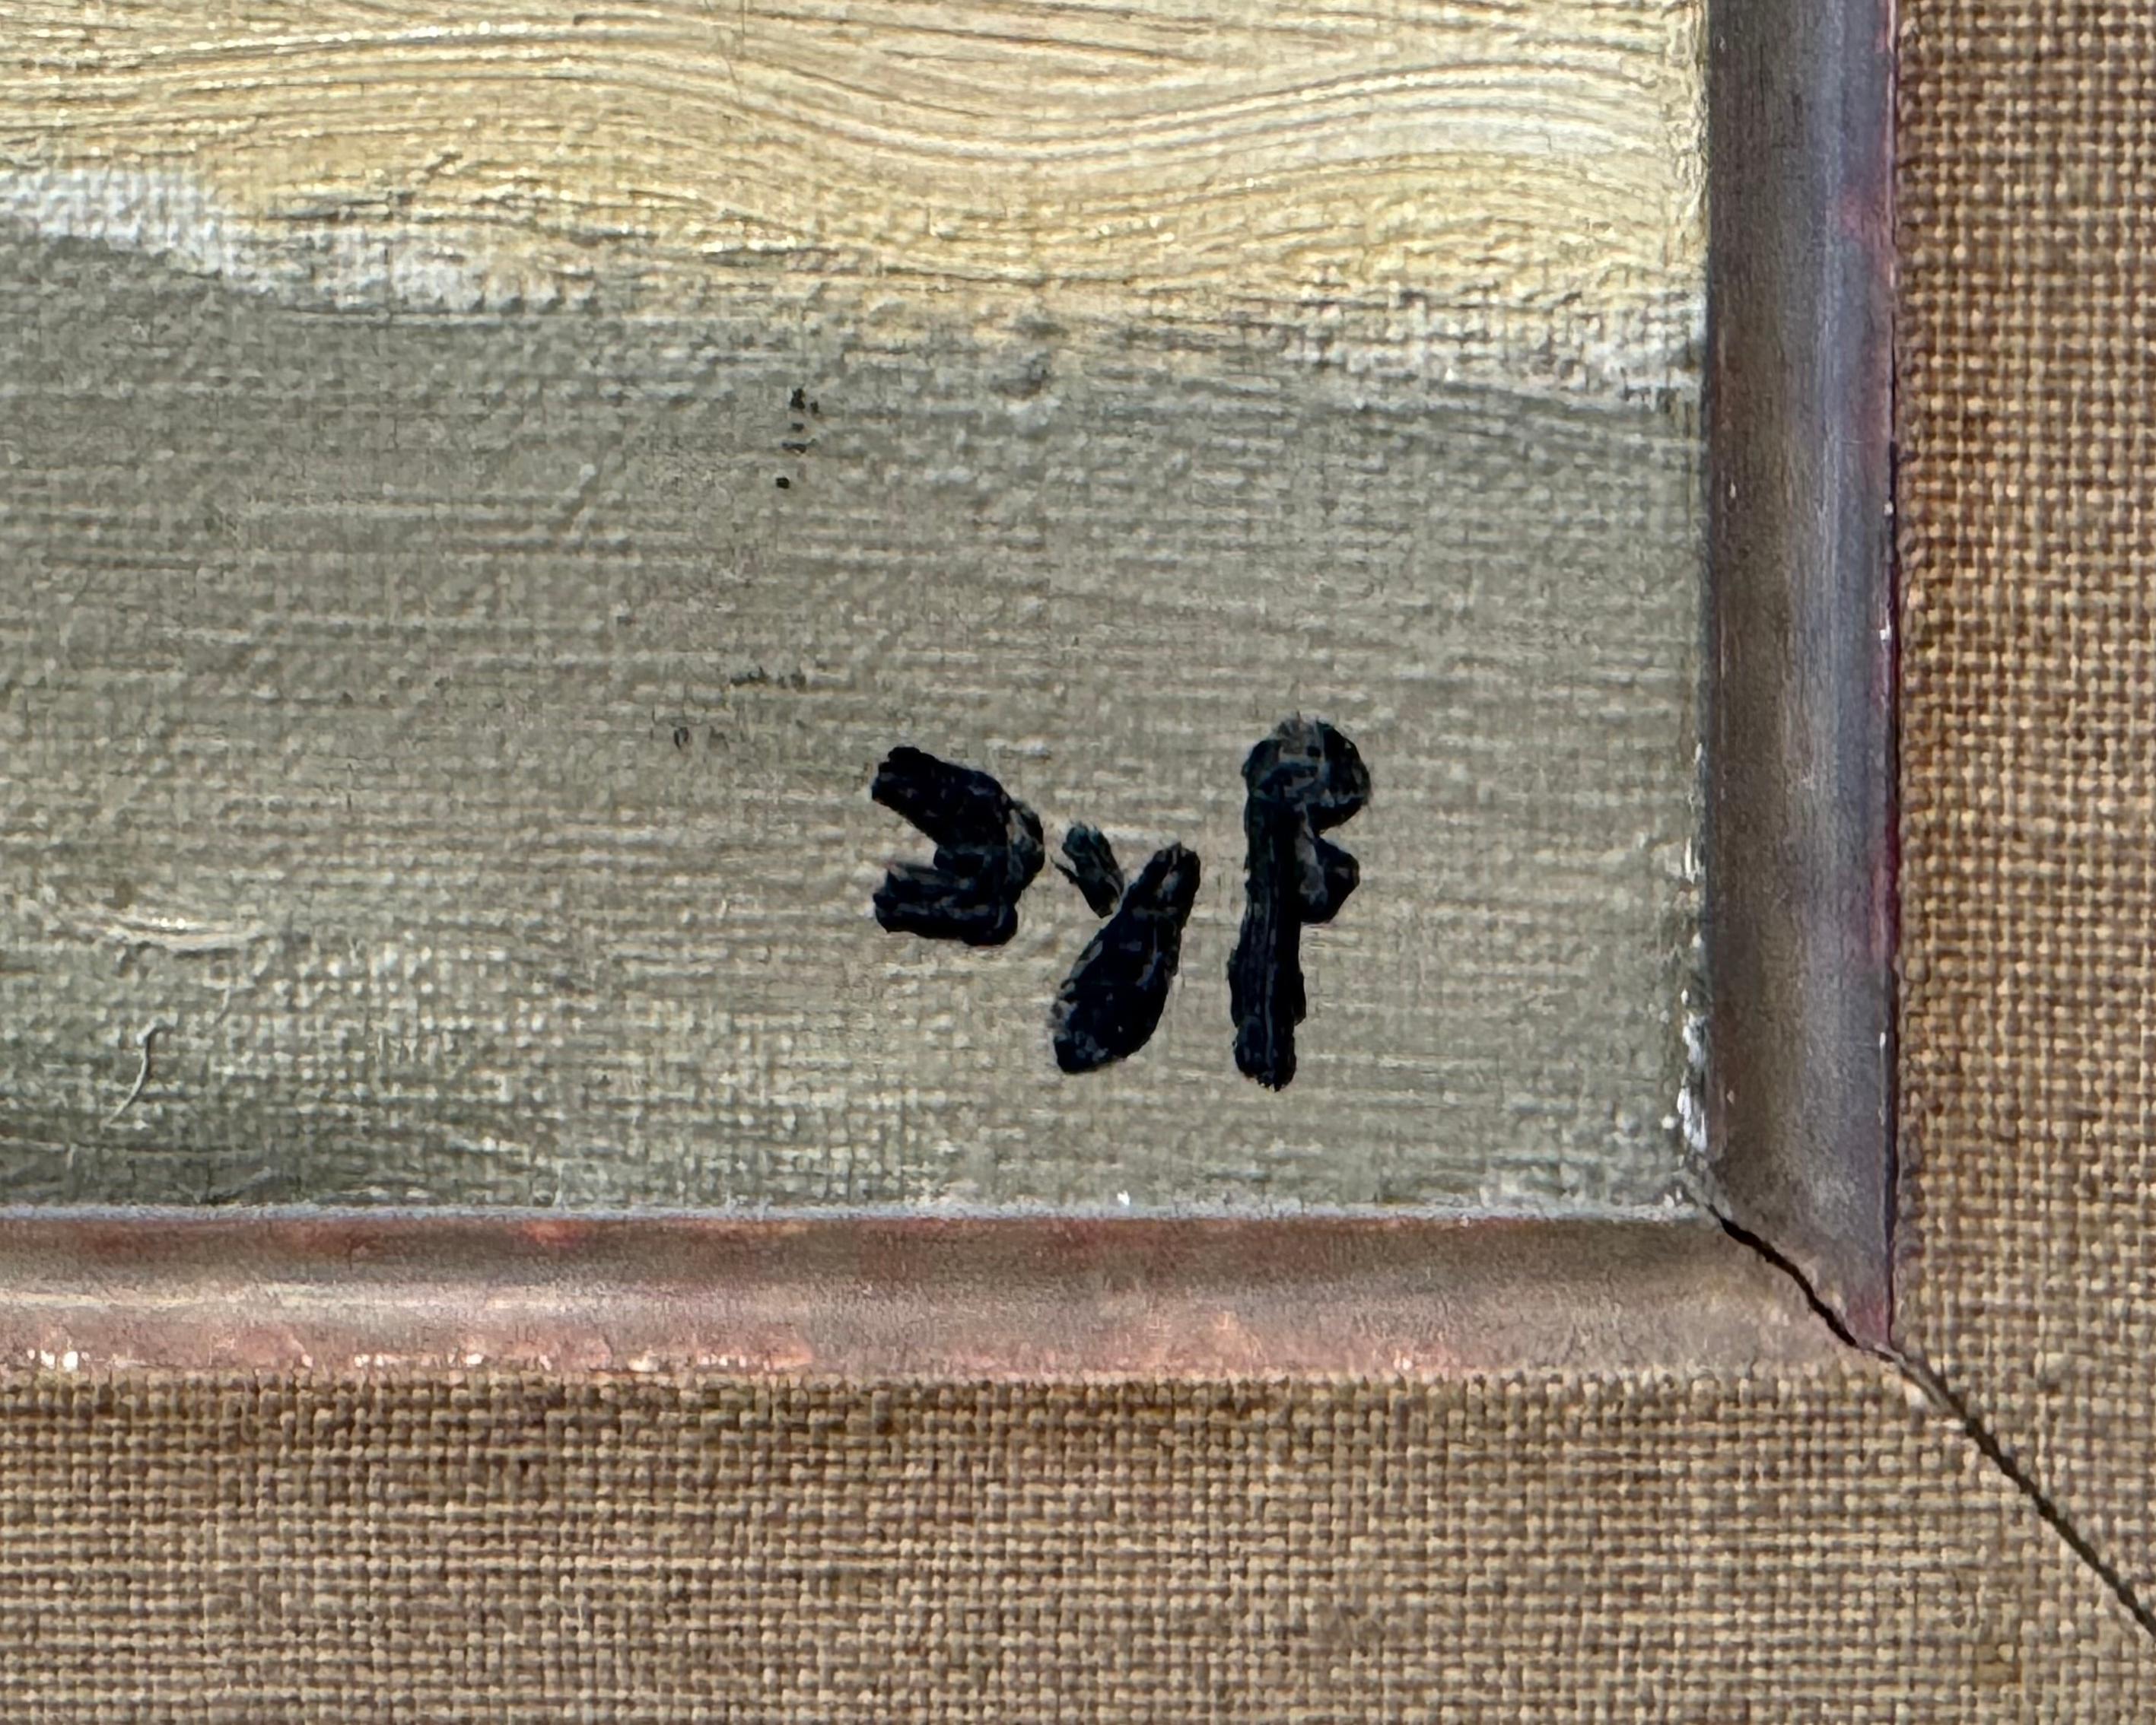 Signed lower right: “DYF”

This item is in our New York City warehouse and can be viewed by appointment.